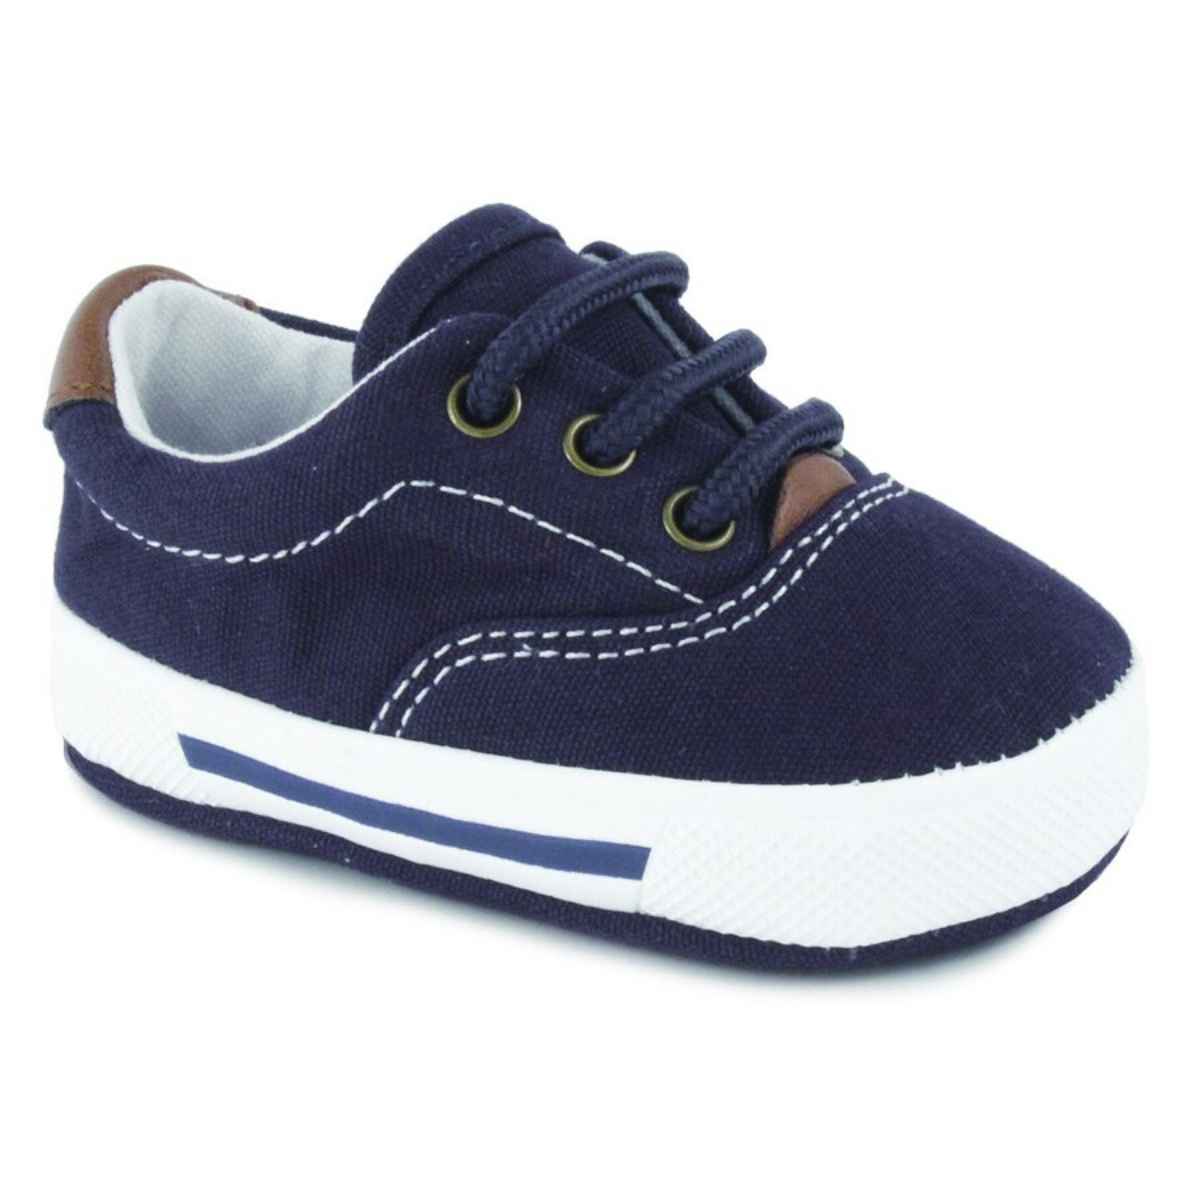 Baby Deer Navy Canvas Lace-Up Sneaker  Size 0 1 2 3 